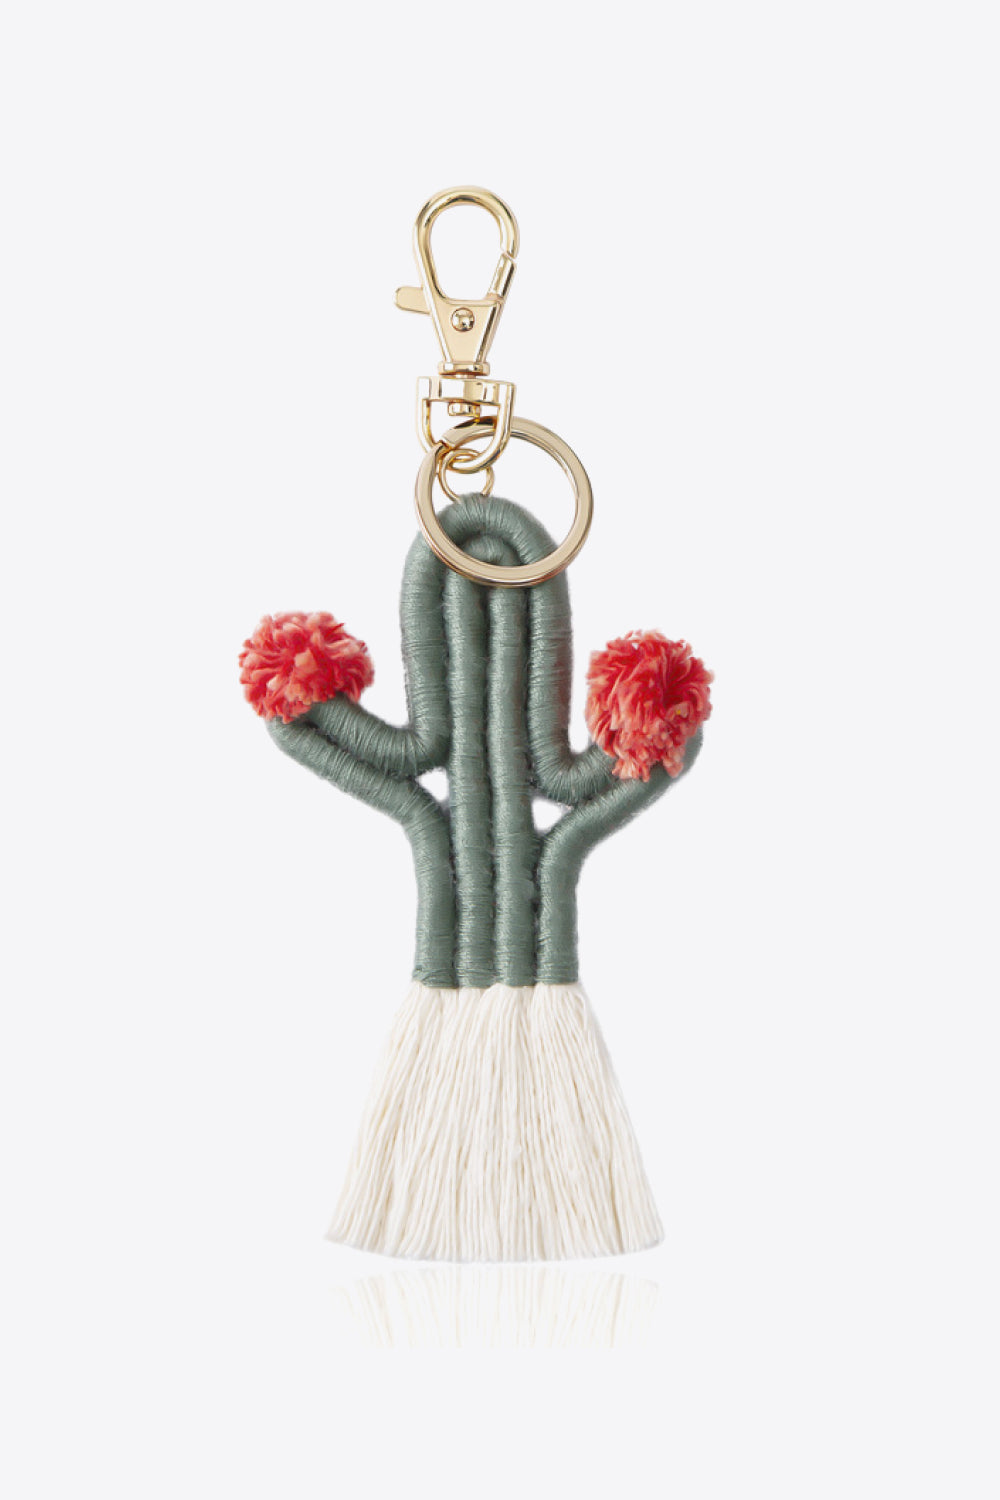 Trendsi Cupid Beauty Supplies Sage / One Size Keychains Cactus Keychain with Fringe